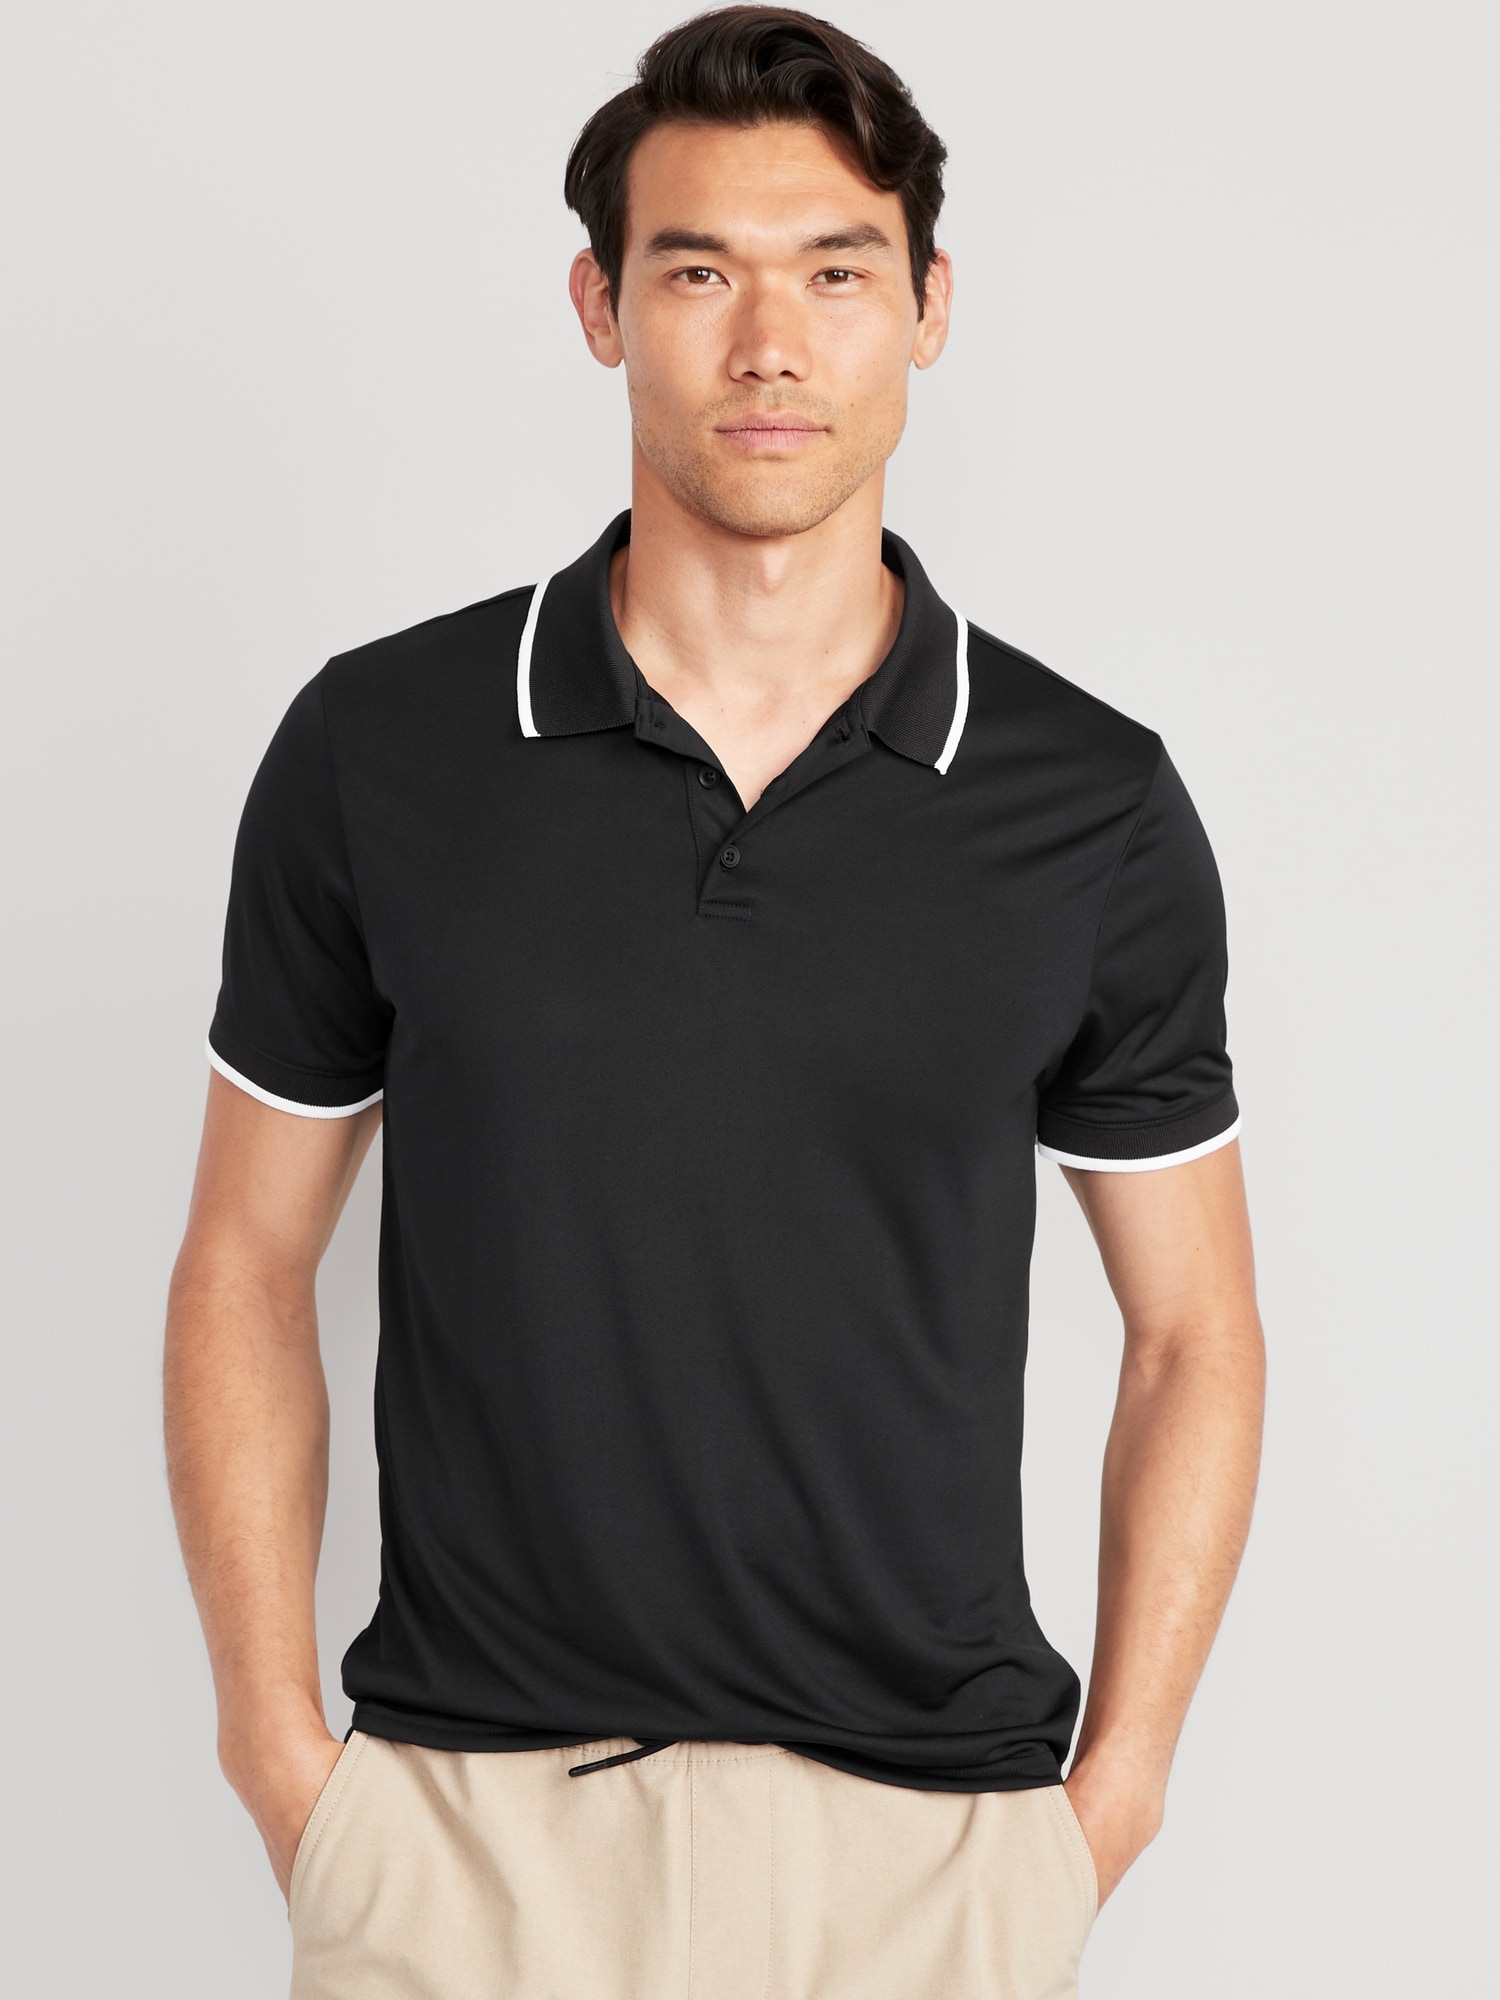 Old Navy Performance Core Polo for Men black. 1